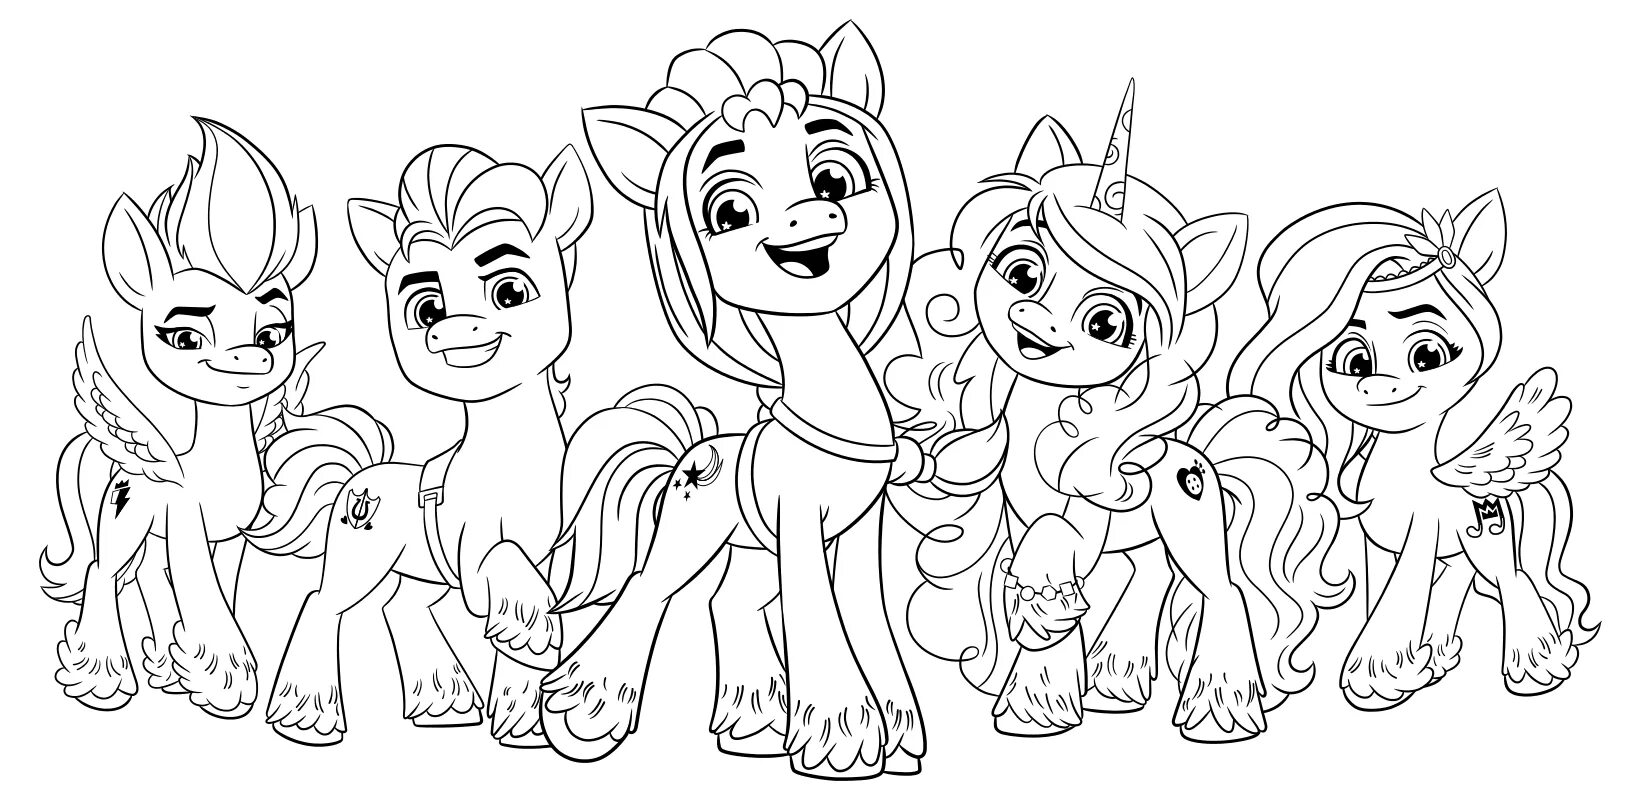 Next generation glowing little pony coloring page